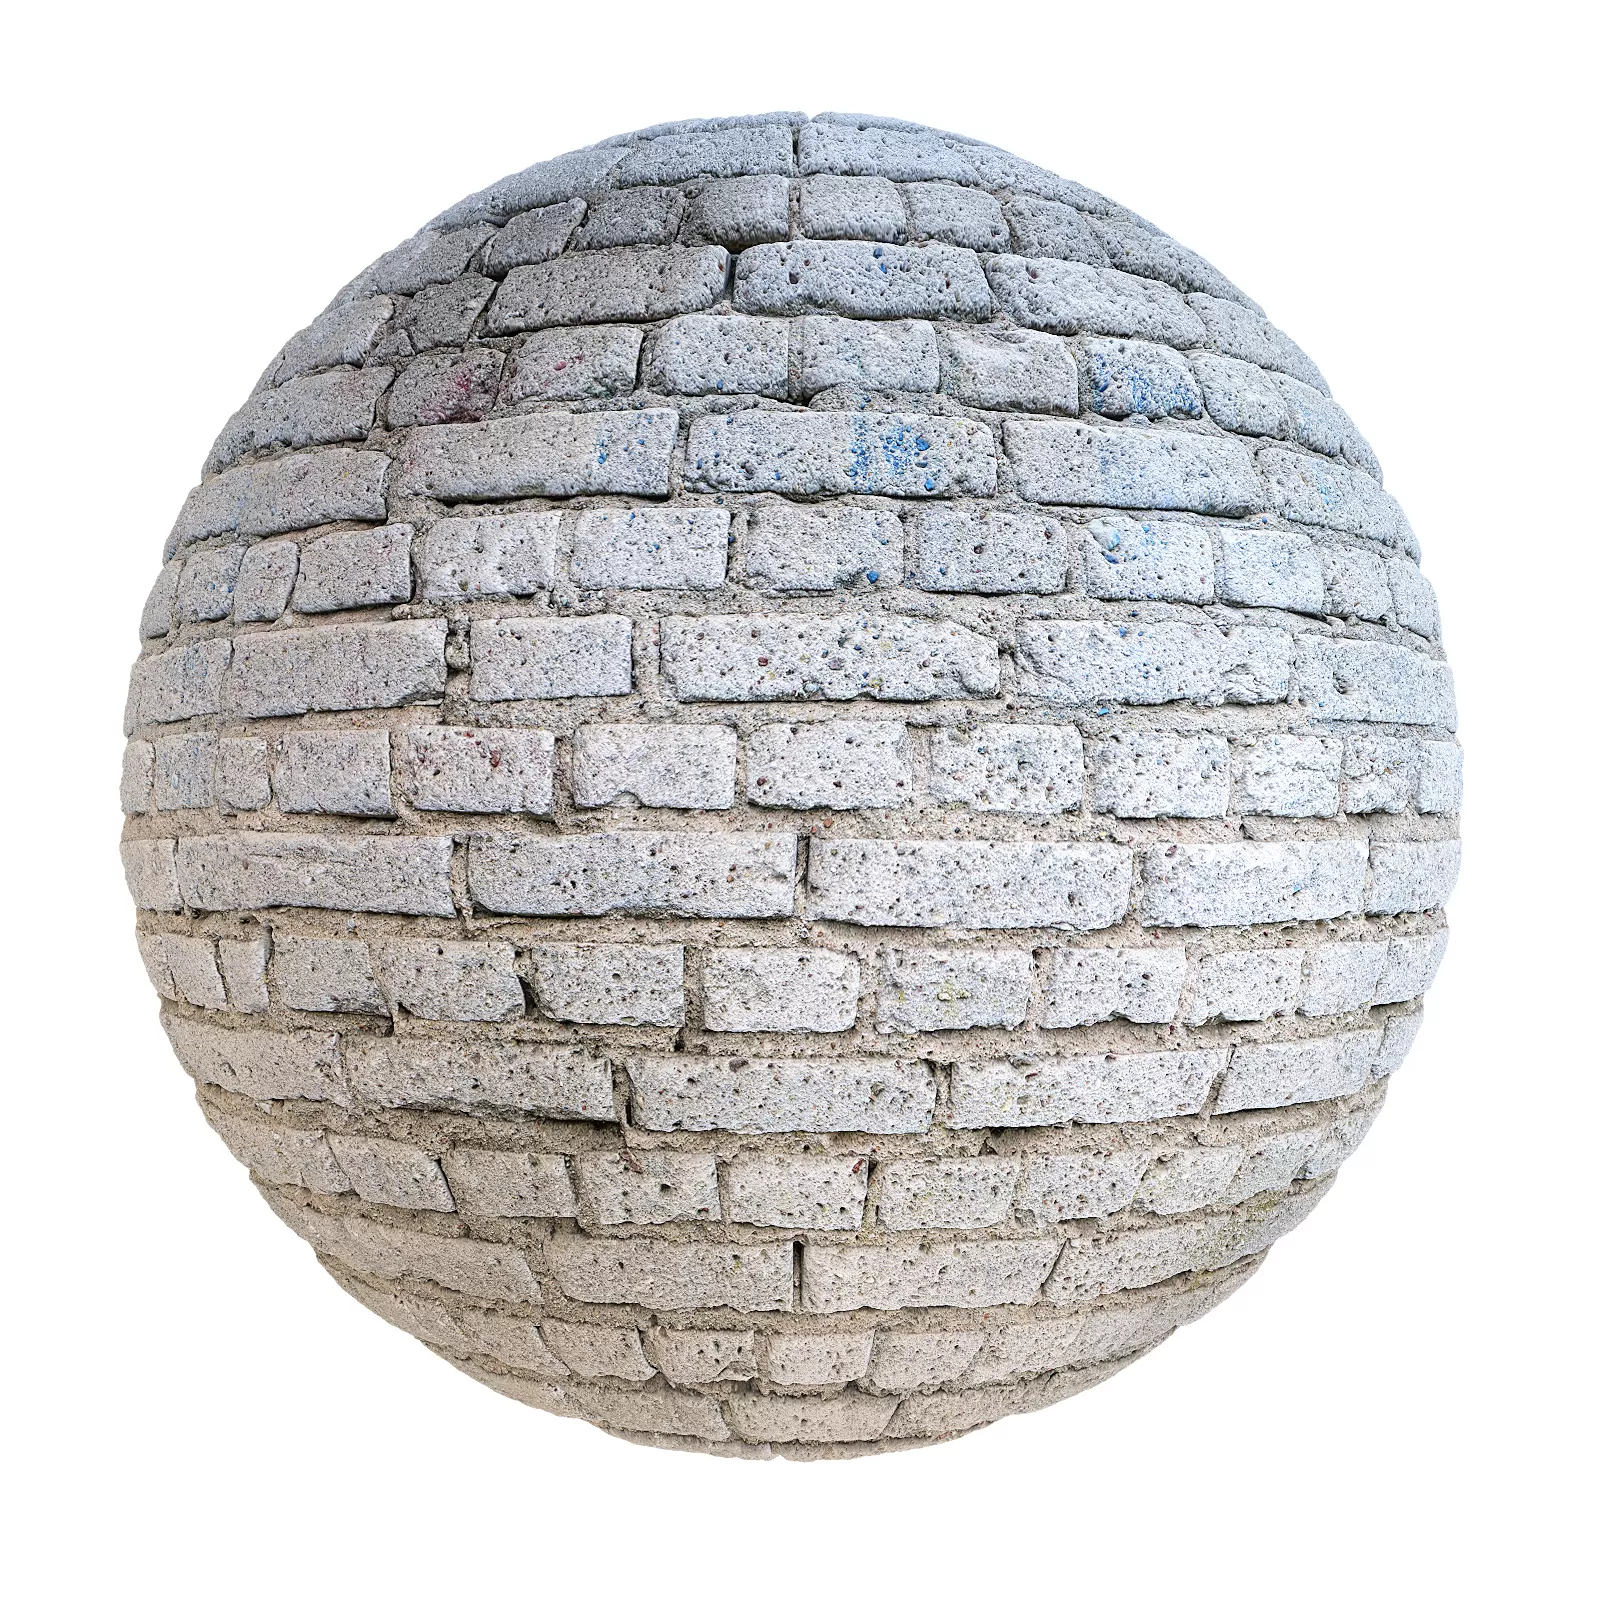 3ds Max Files – Texture – 9 – Stone Texture – 20 – Stone Texture by Minh Nguyen